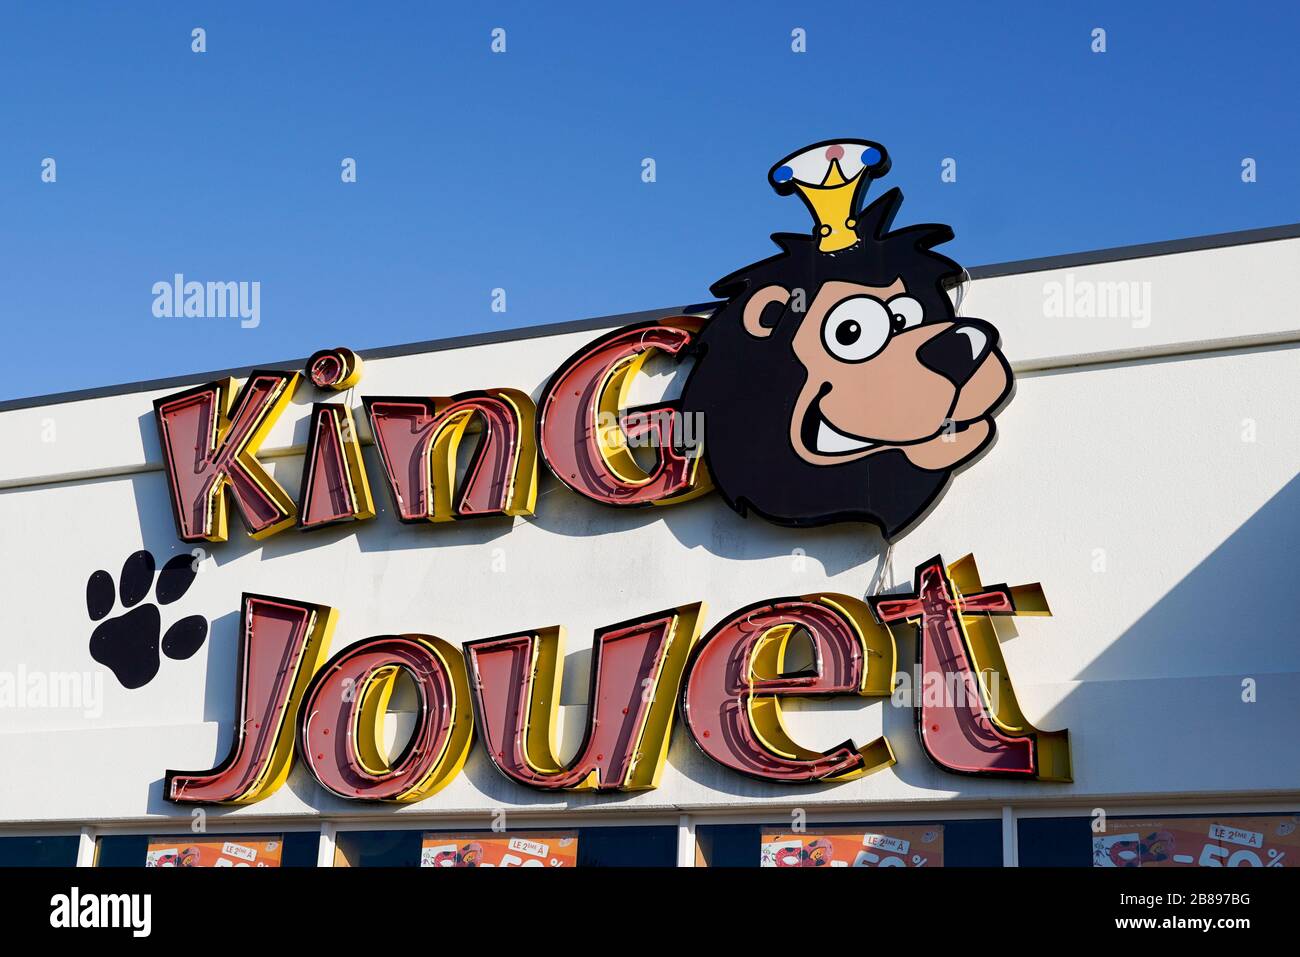 Bordeaux , Aquitaine / France - 03 15 2020 : King Jouet game and child toy  store logo sign kids children baby toys brand shop Stock Photo - Alamy